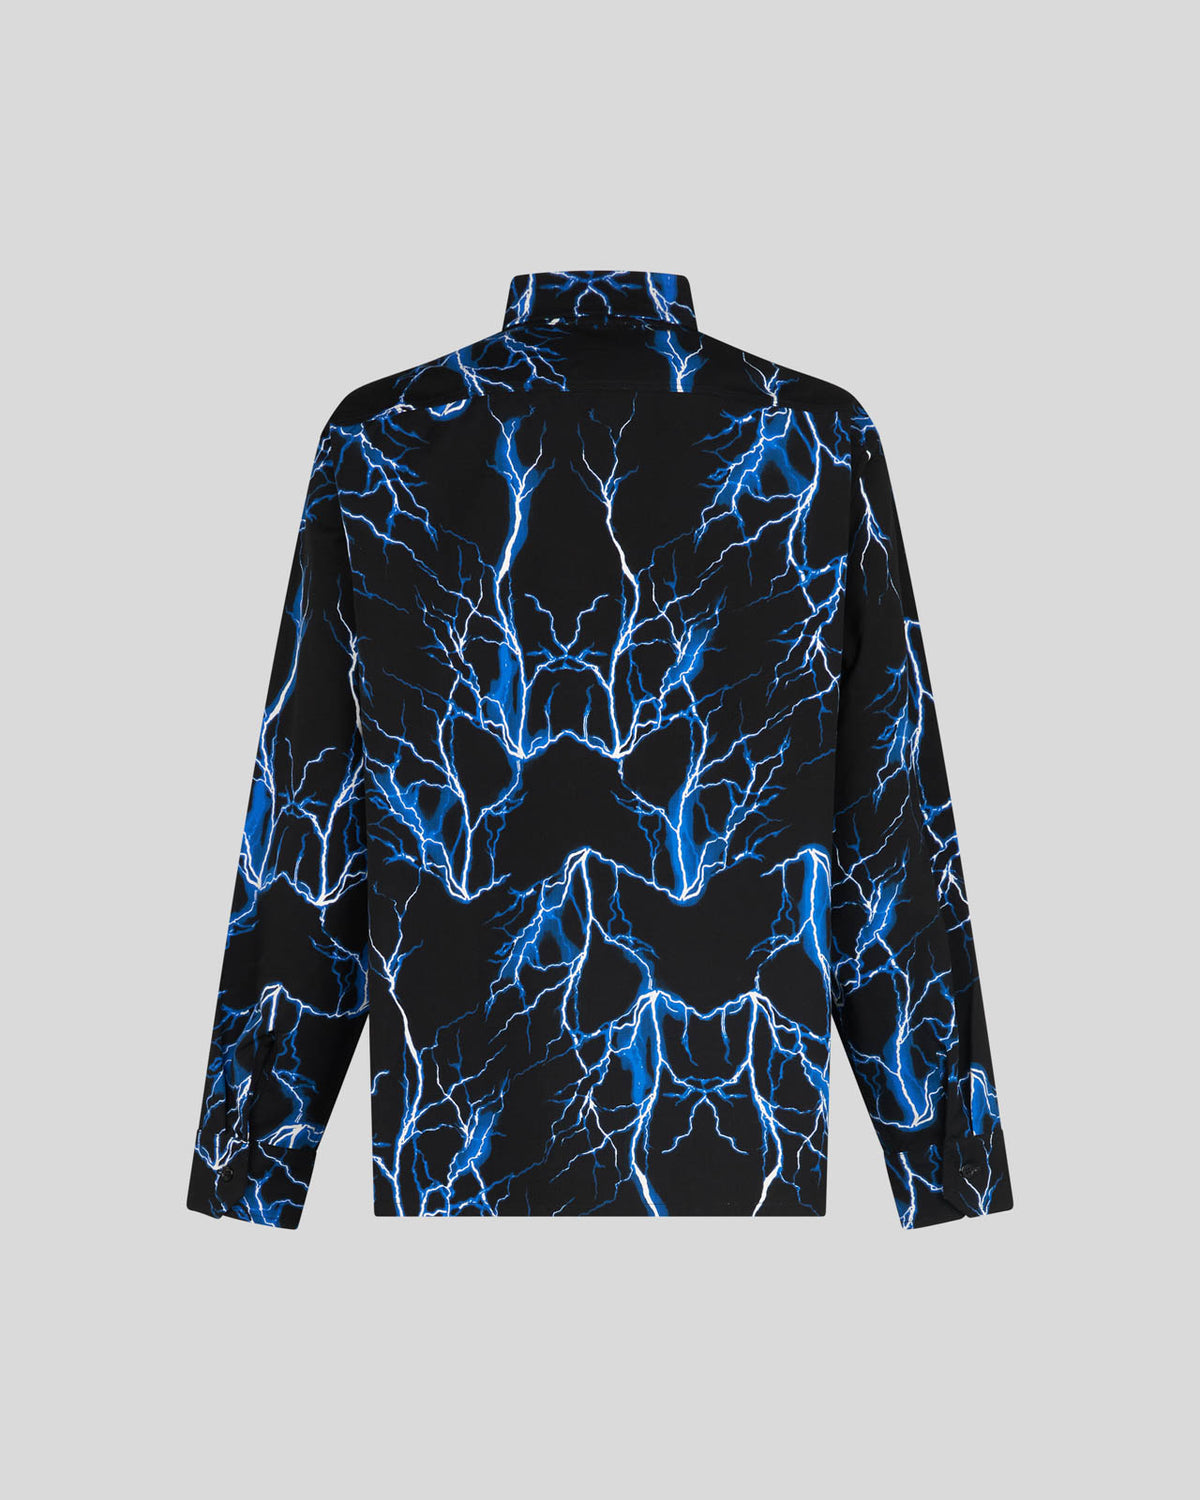 PHOBIA BLACK SHIRT WITH BLUE ALL OVER LIGHTNING